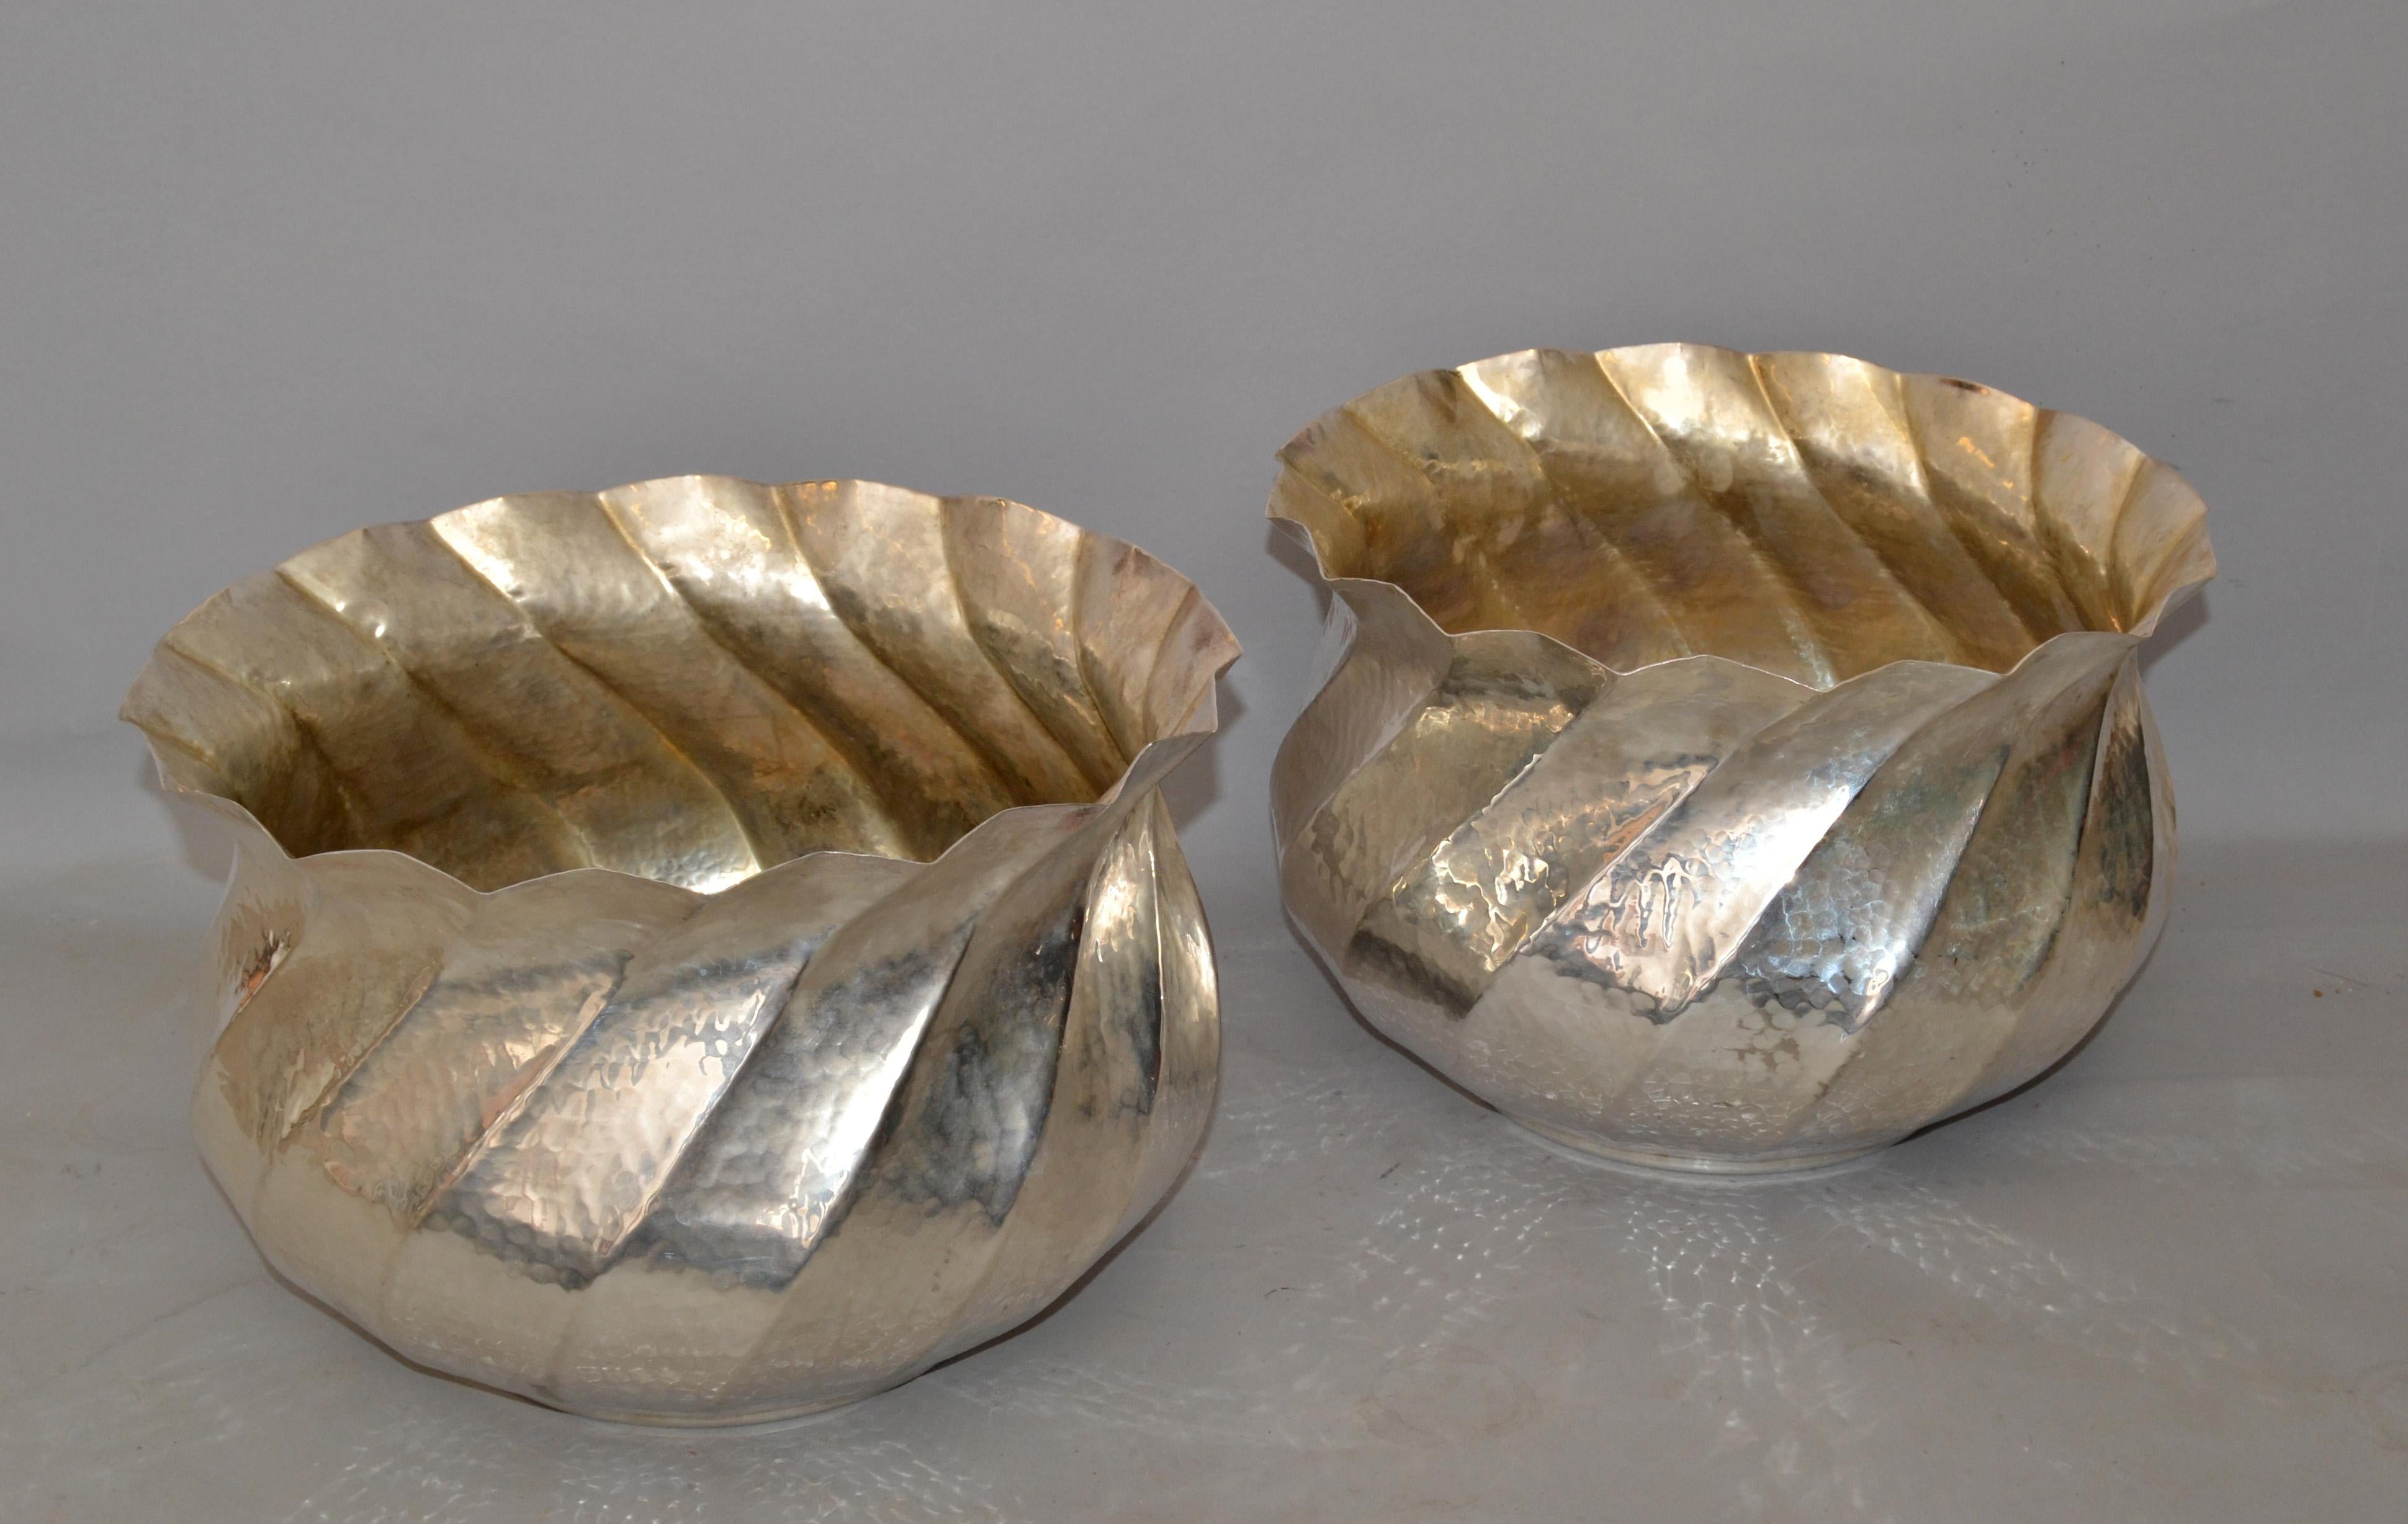 Pair of exceptional hand-crafted Silver-Plated planters made in the USA circa 1950s in the Arts And Crafts Period.
Both are marked Silver Plated at the Base.
In good vintage condition with some patina inside.